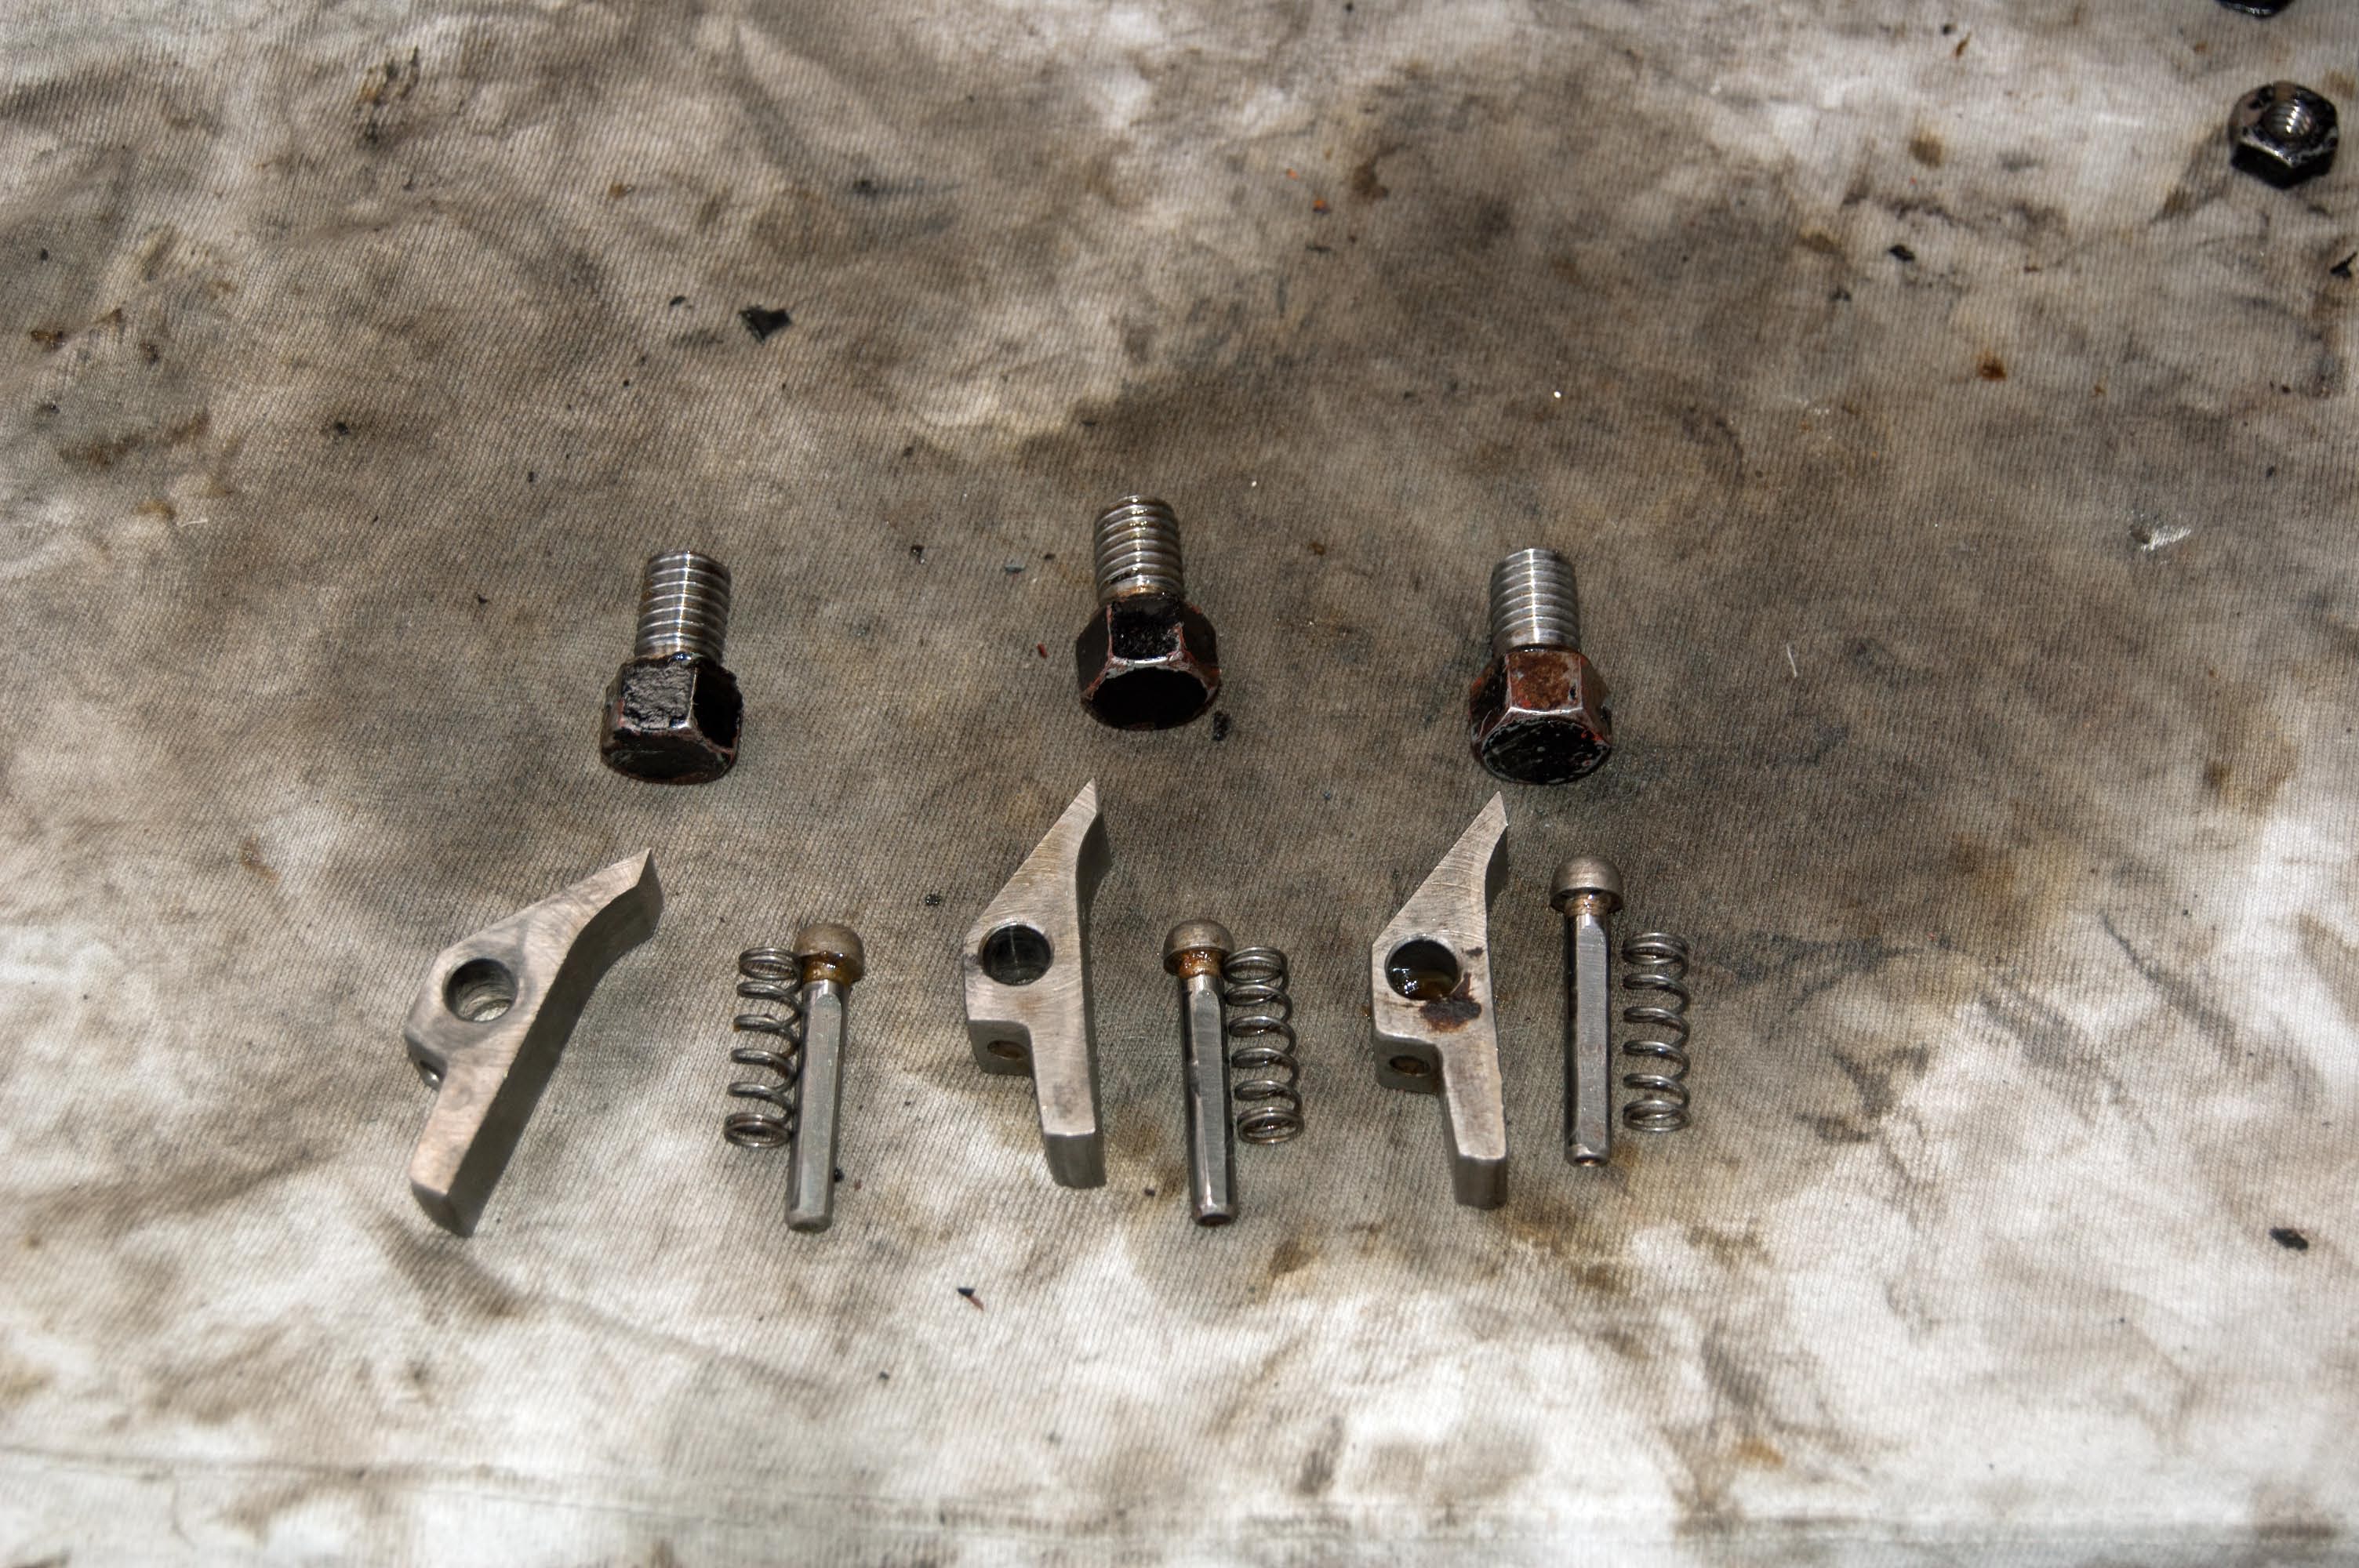 The three pawls, and associated parts, from one of the lubricator ratchets